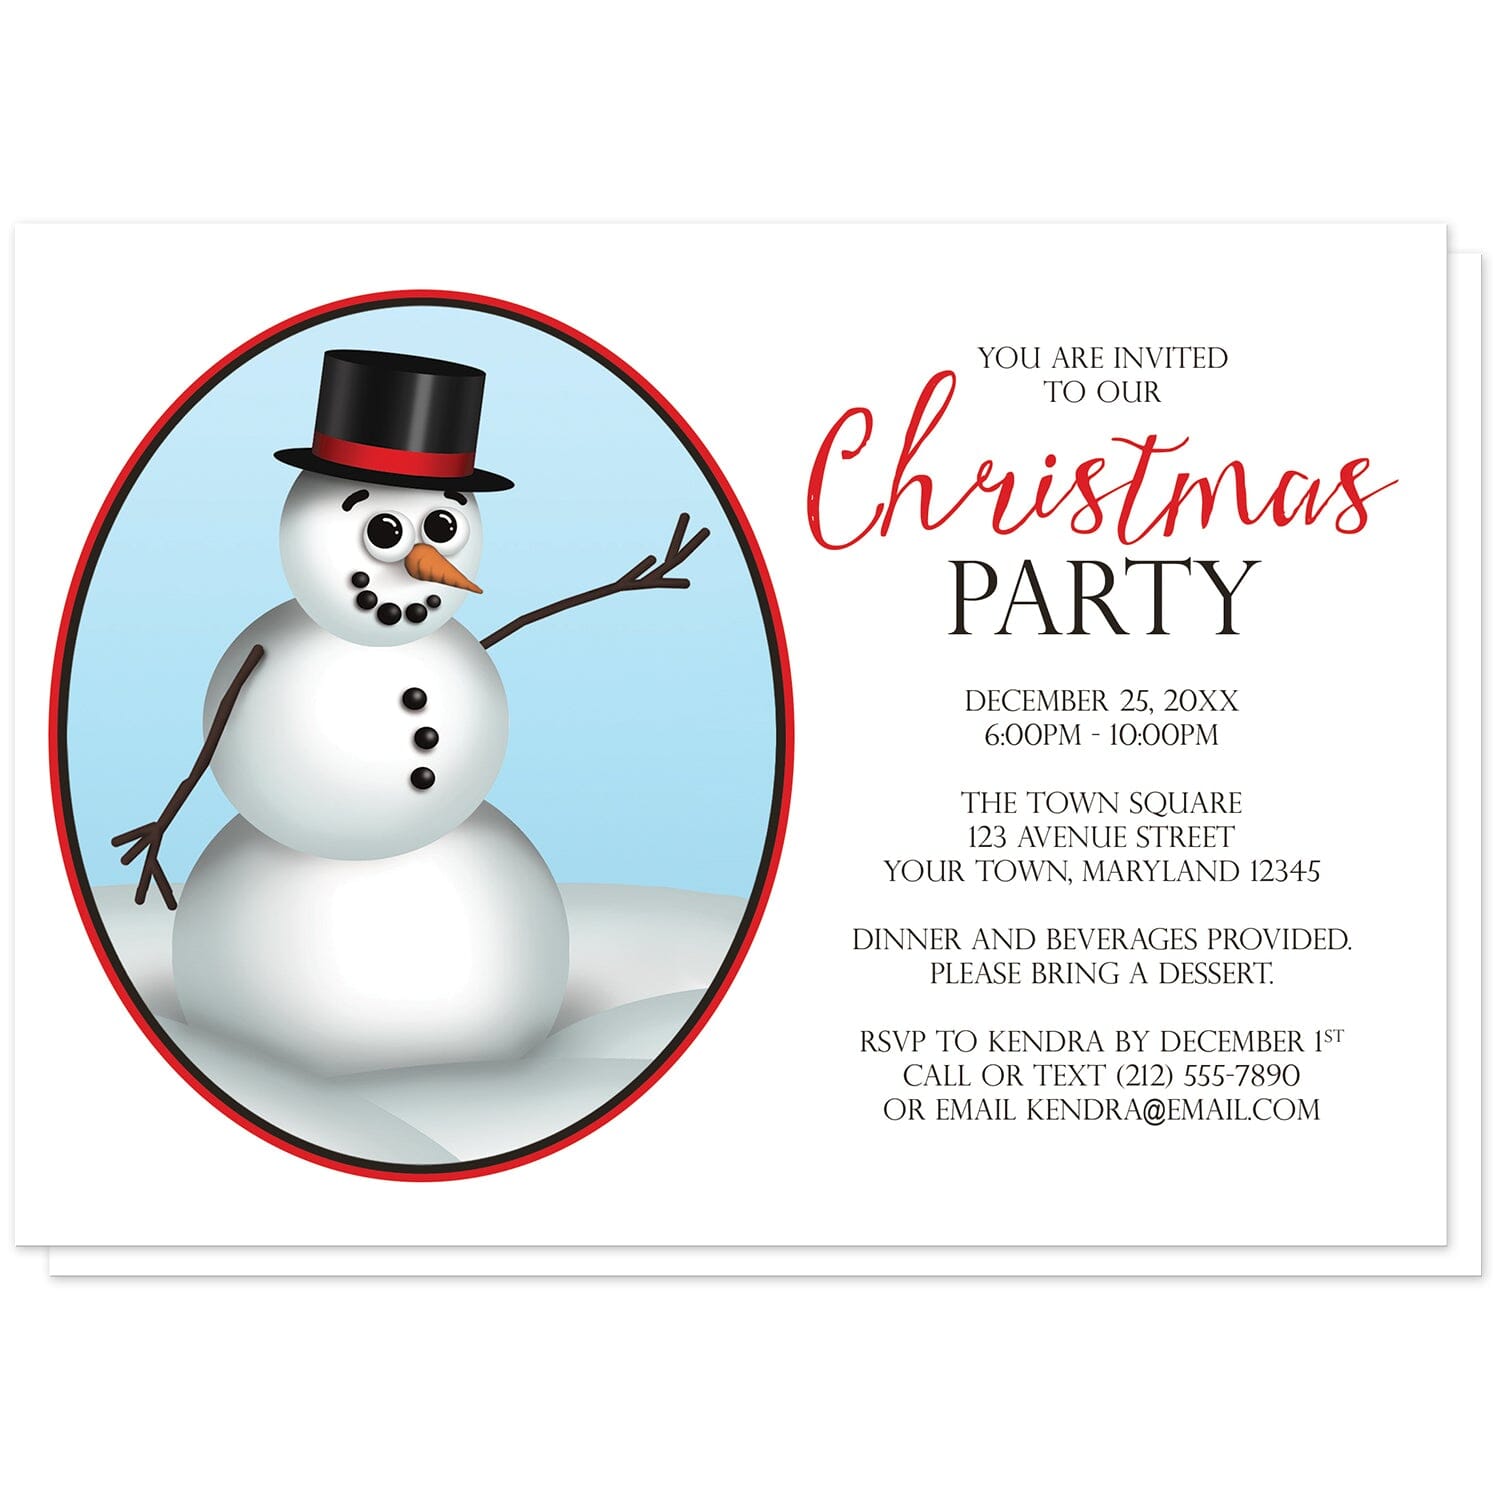 Cute and Classy Snowman Christmas Party Invitations